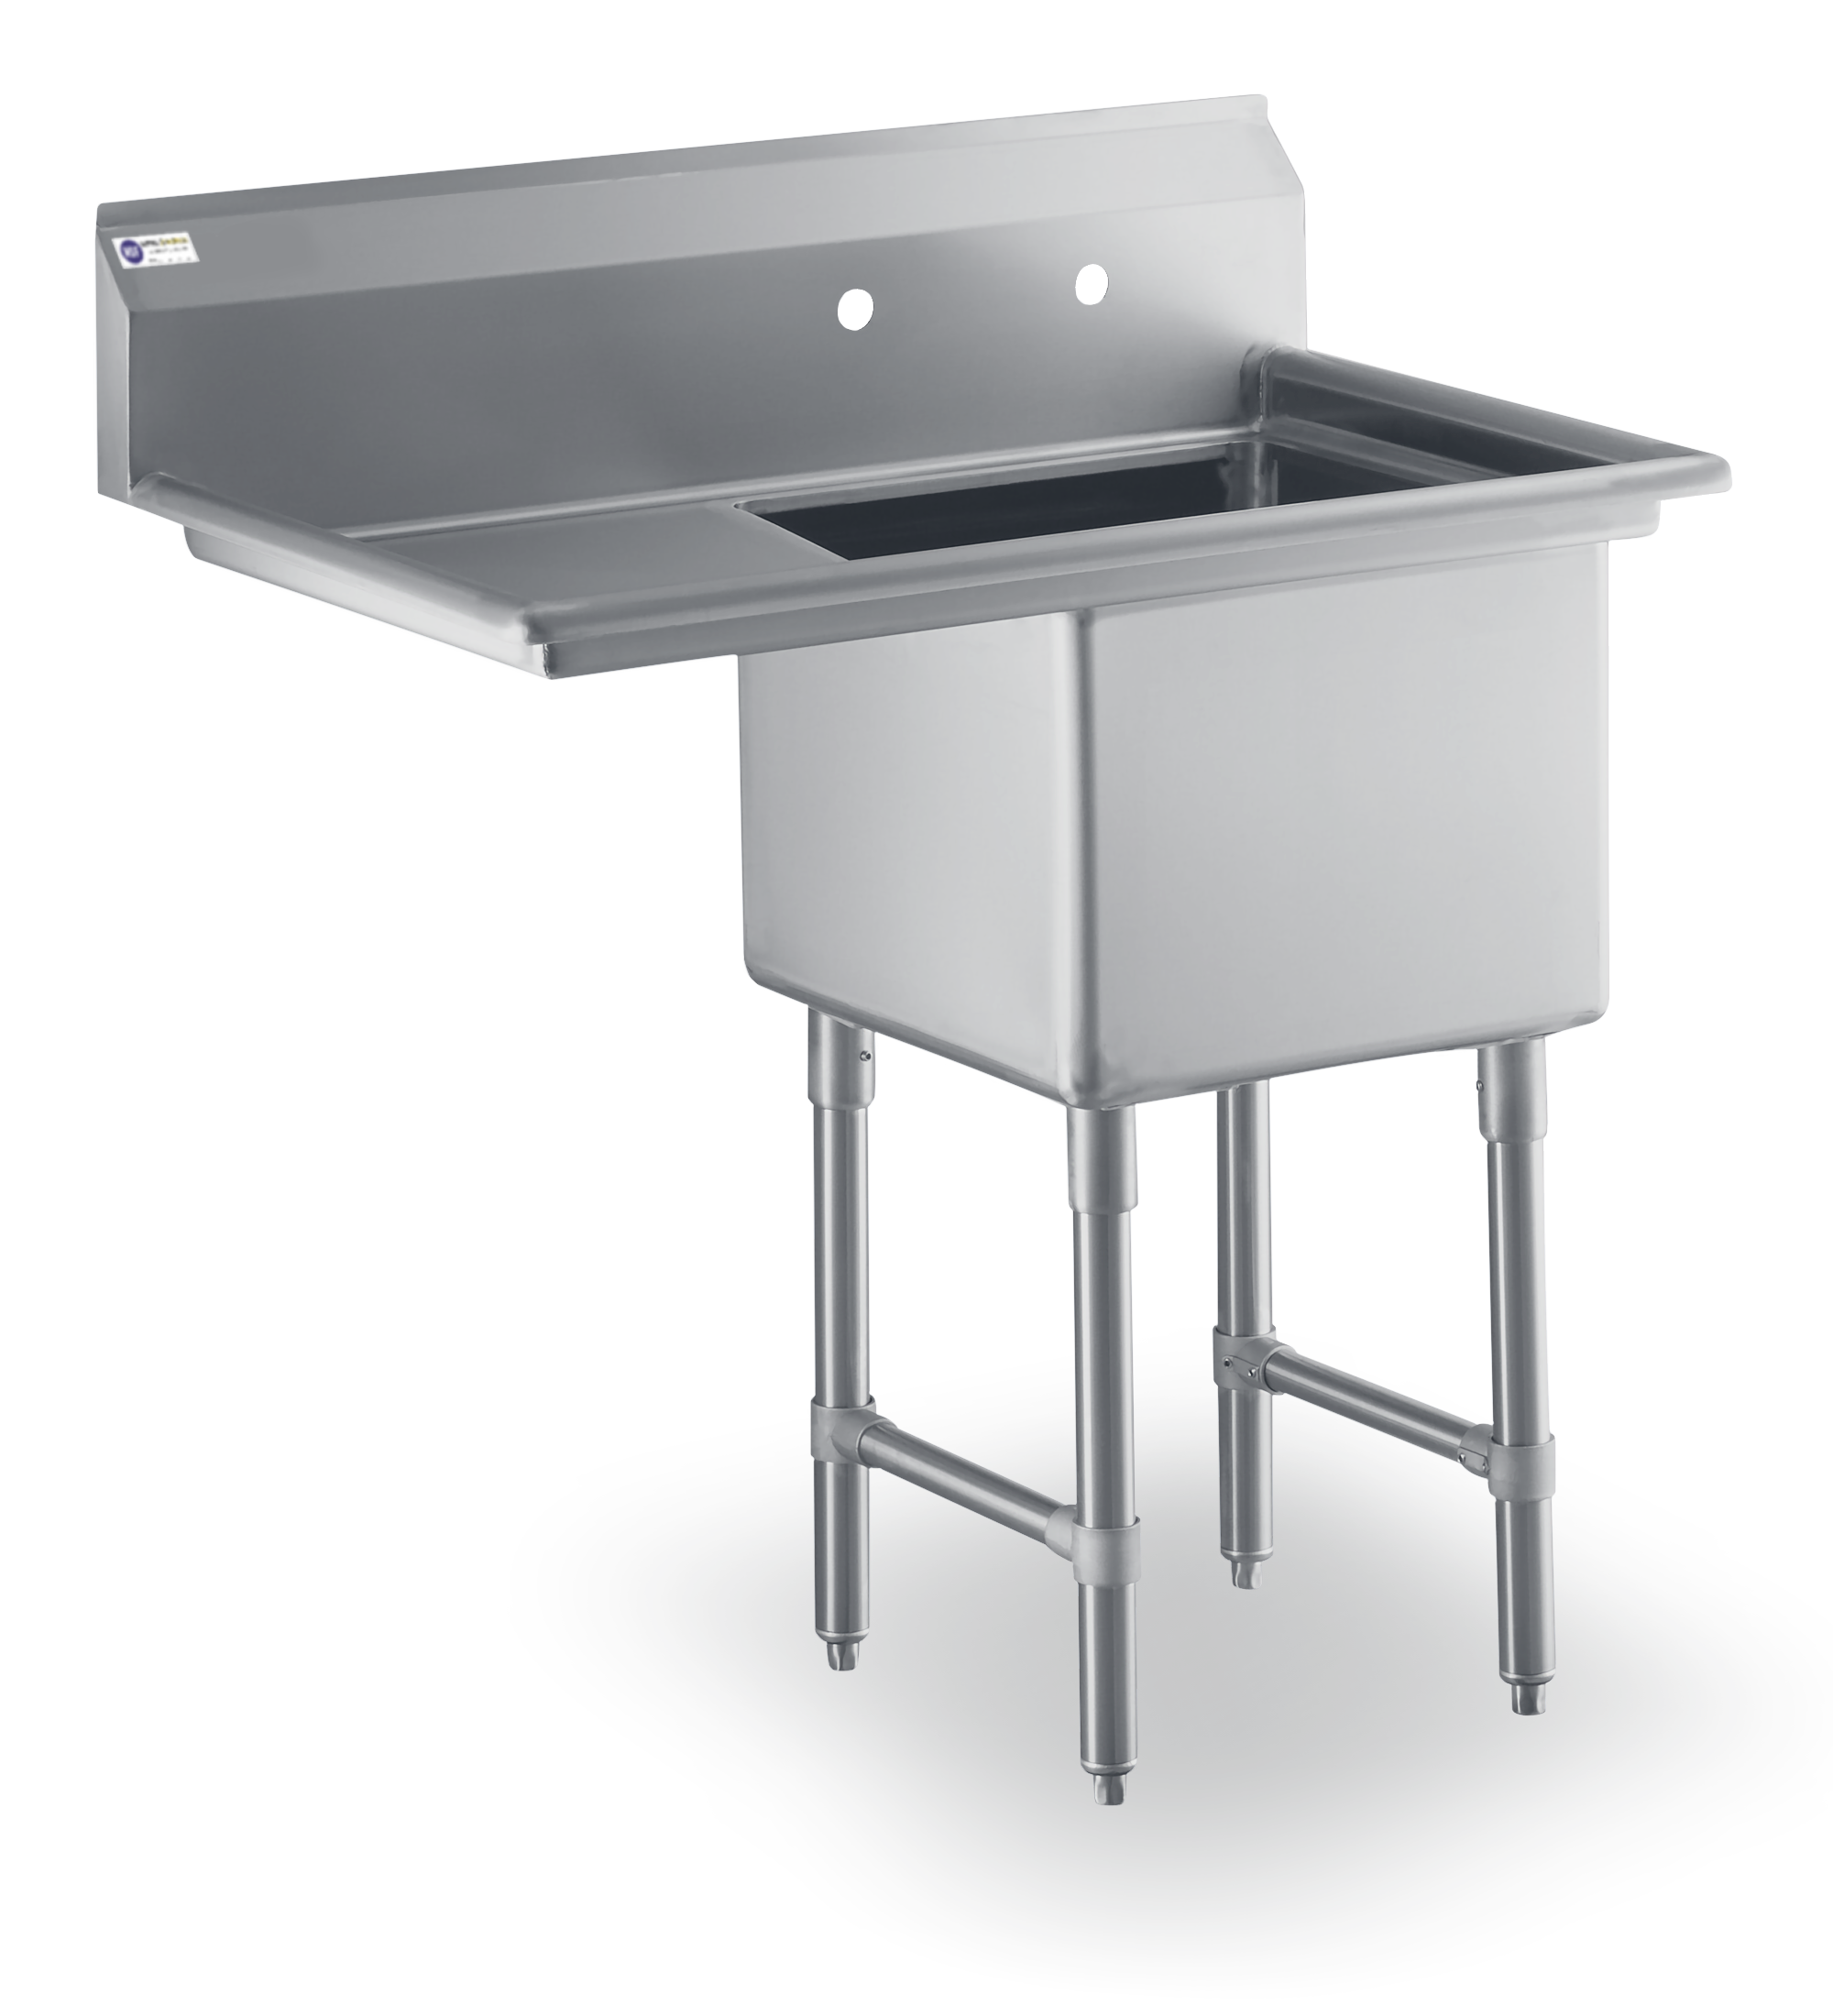 https://www.steelworks-stainless.com/wp-content/uploads/2021/04/1-C-Sink-Left-Drainboard.png